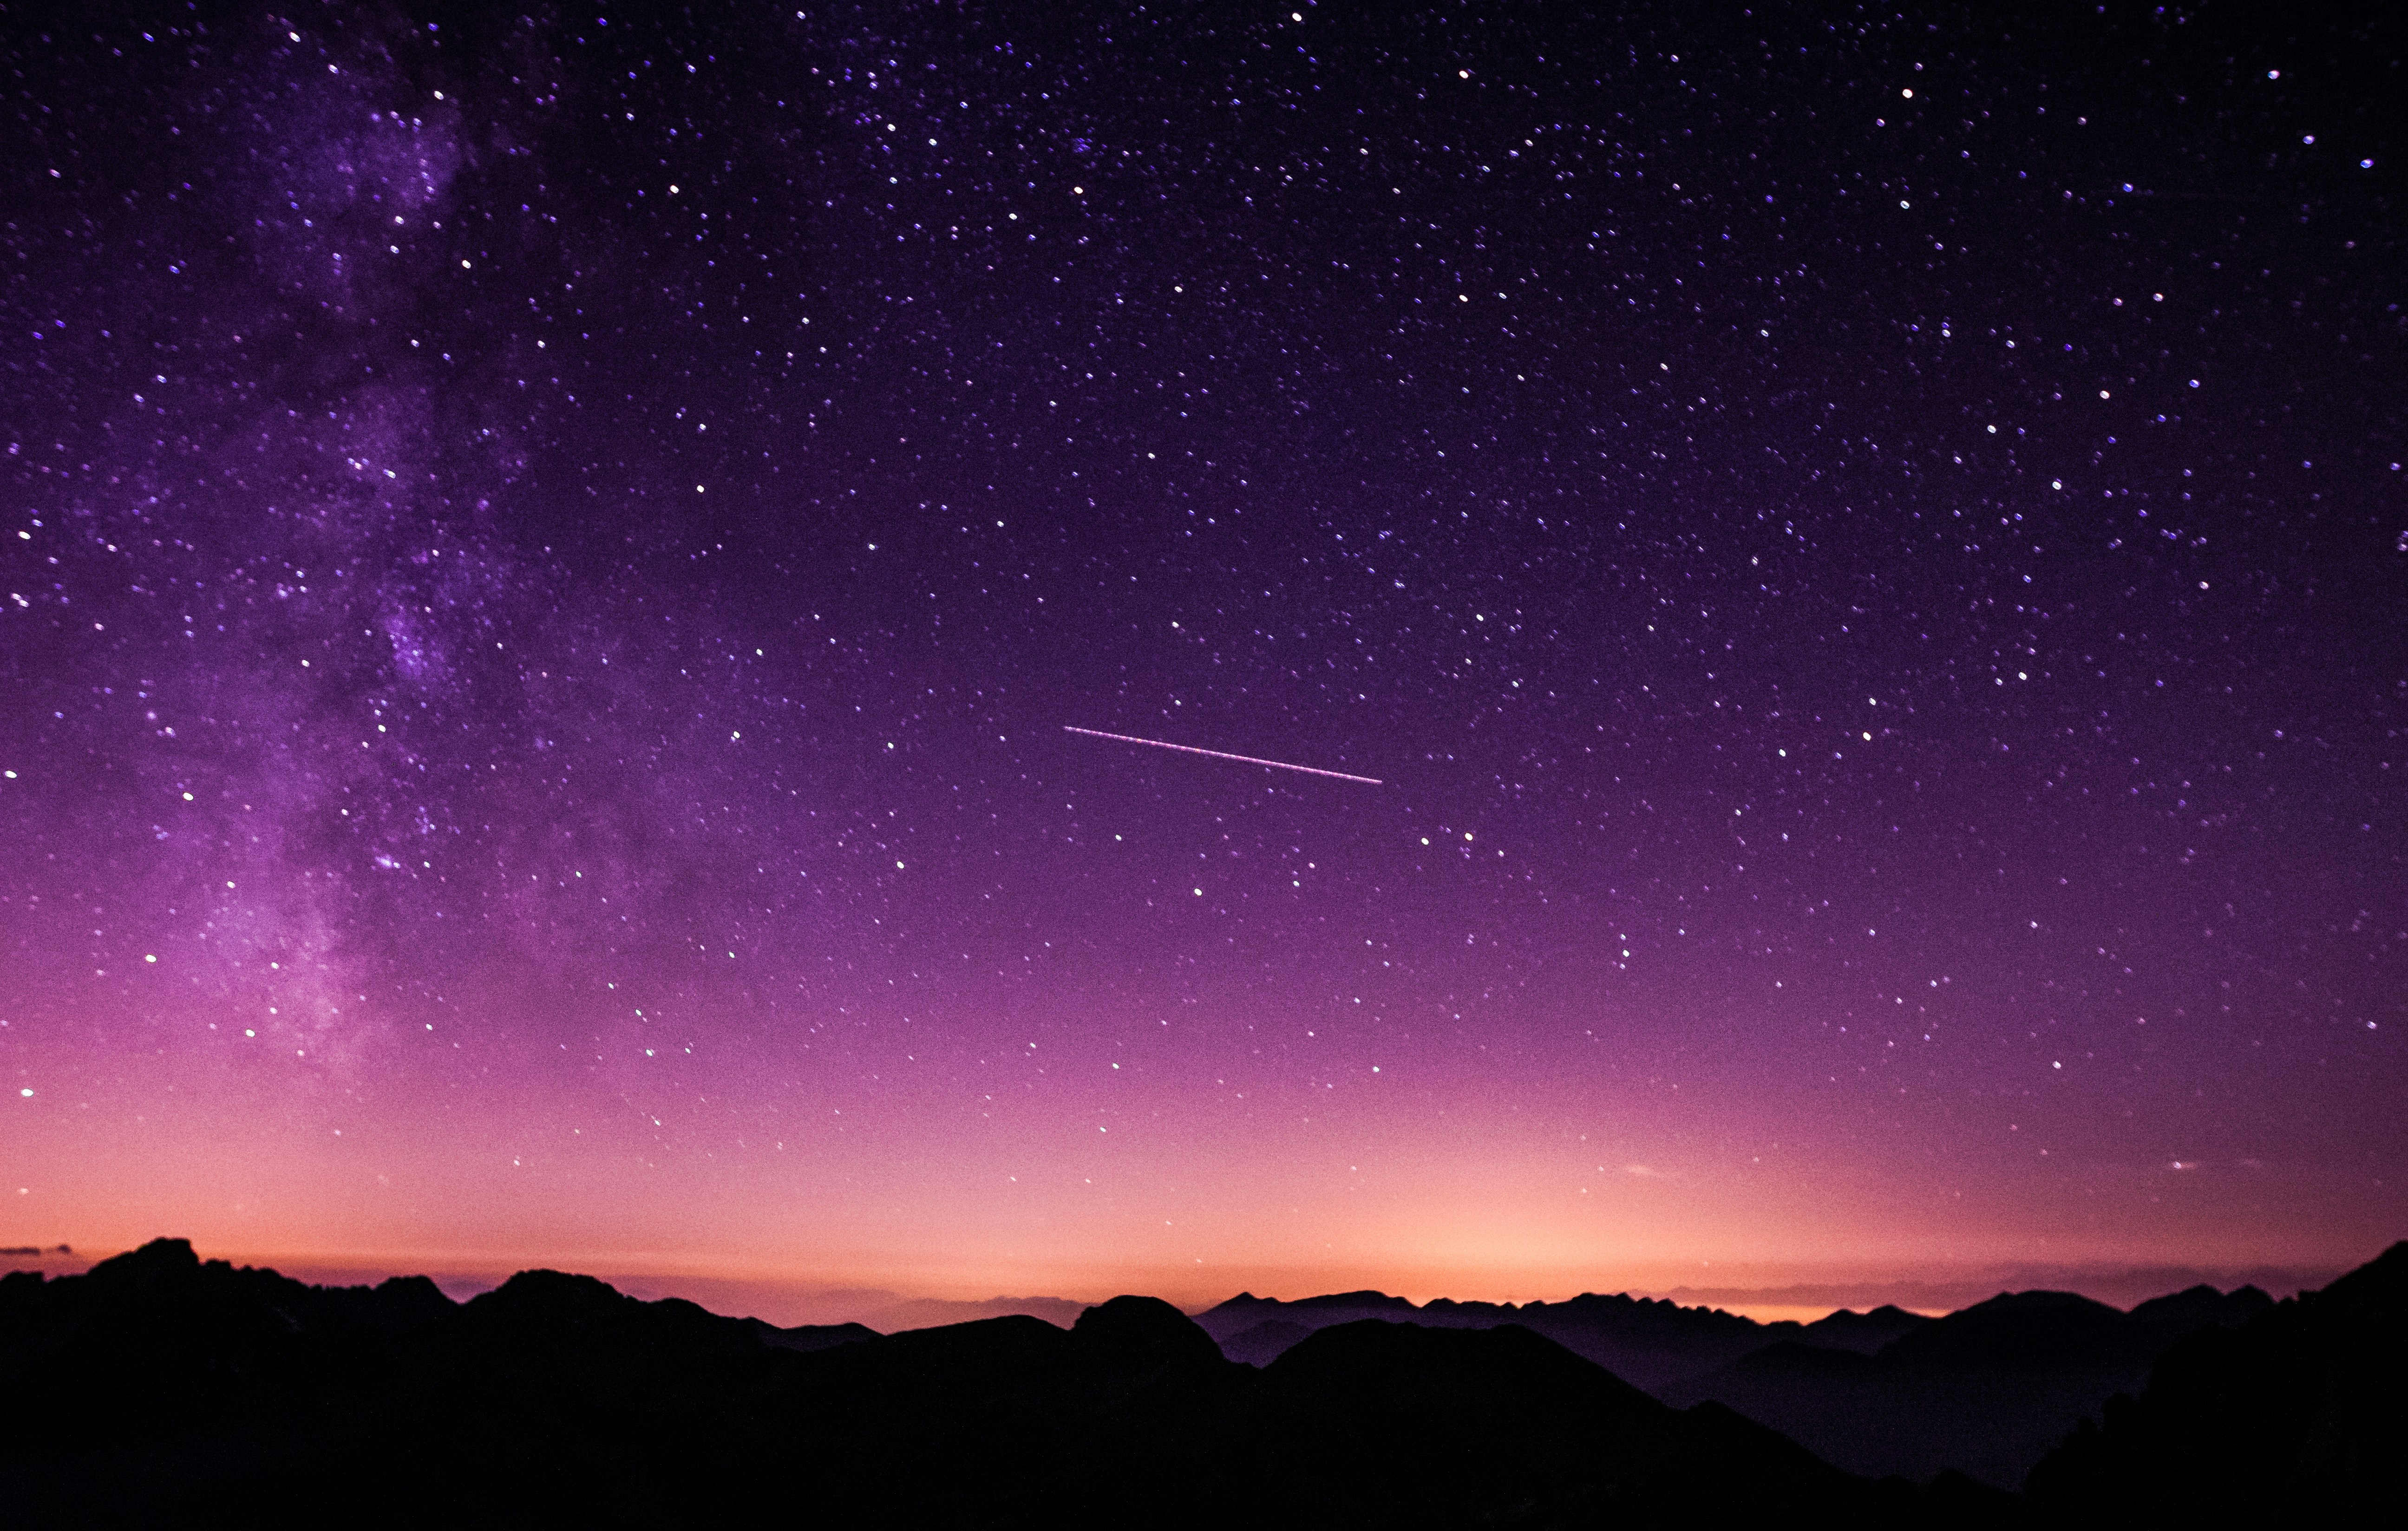 A picture of a sunset with the stars and mountains visible, as well as a shooting star across the center.